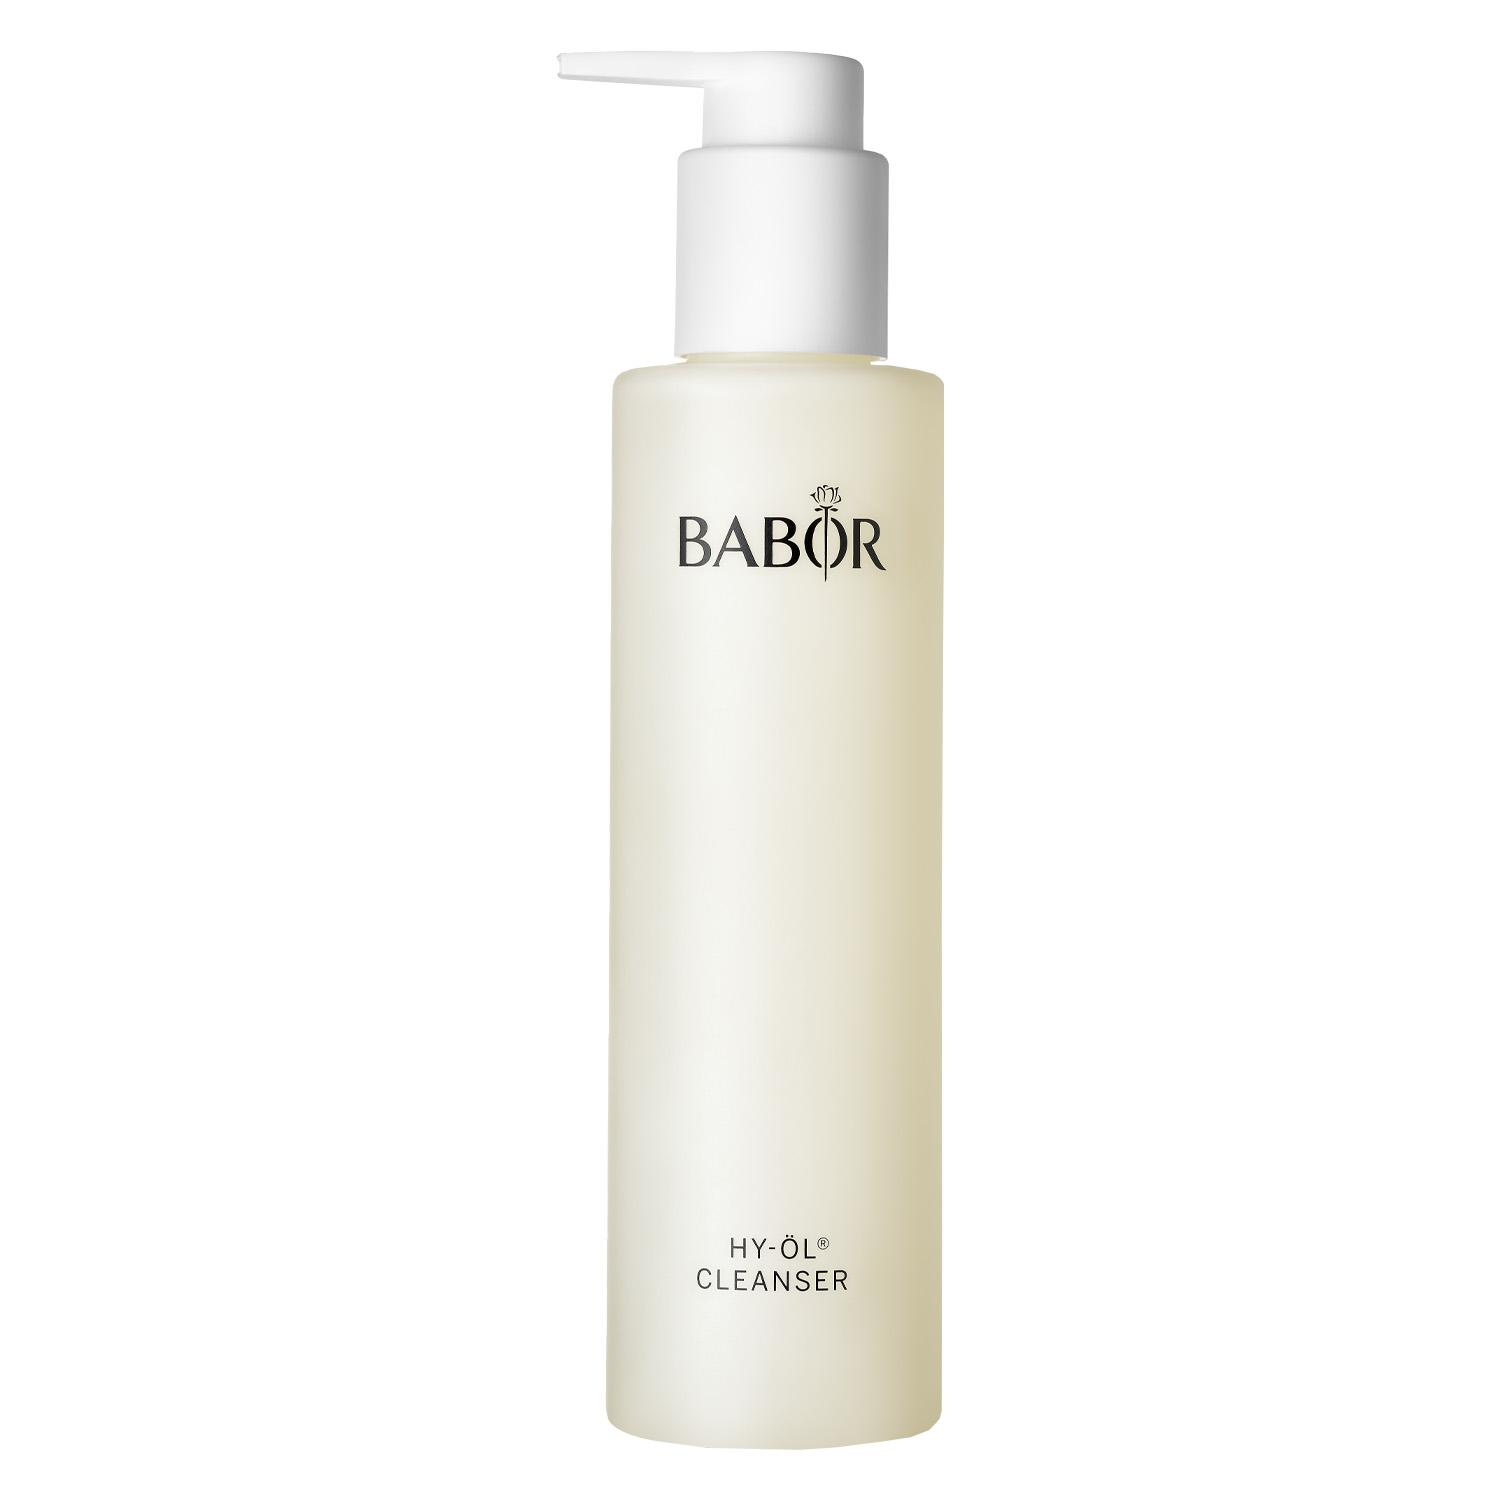 BABOR CLEANSING - HY-Öl Cleanser